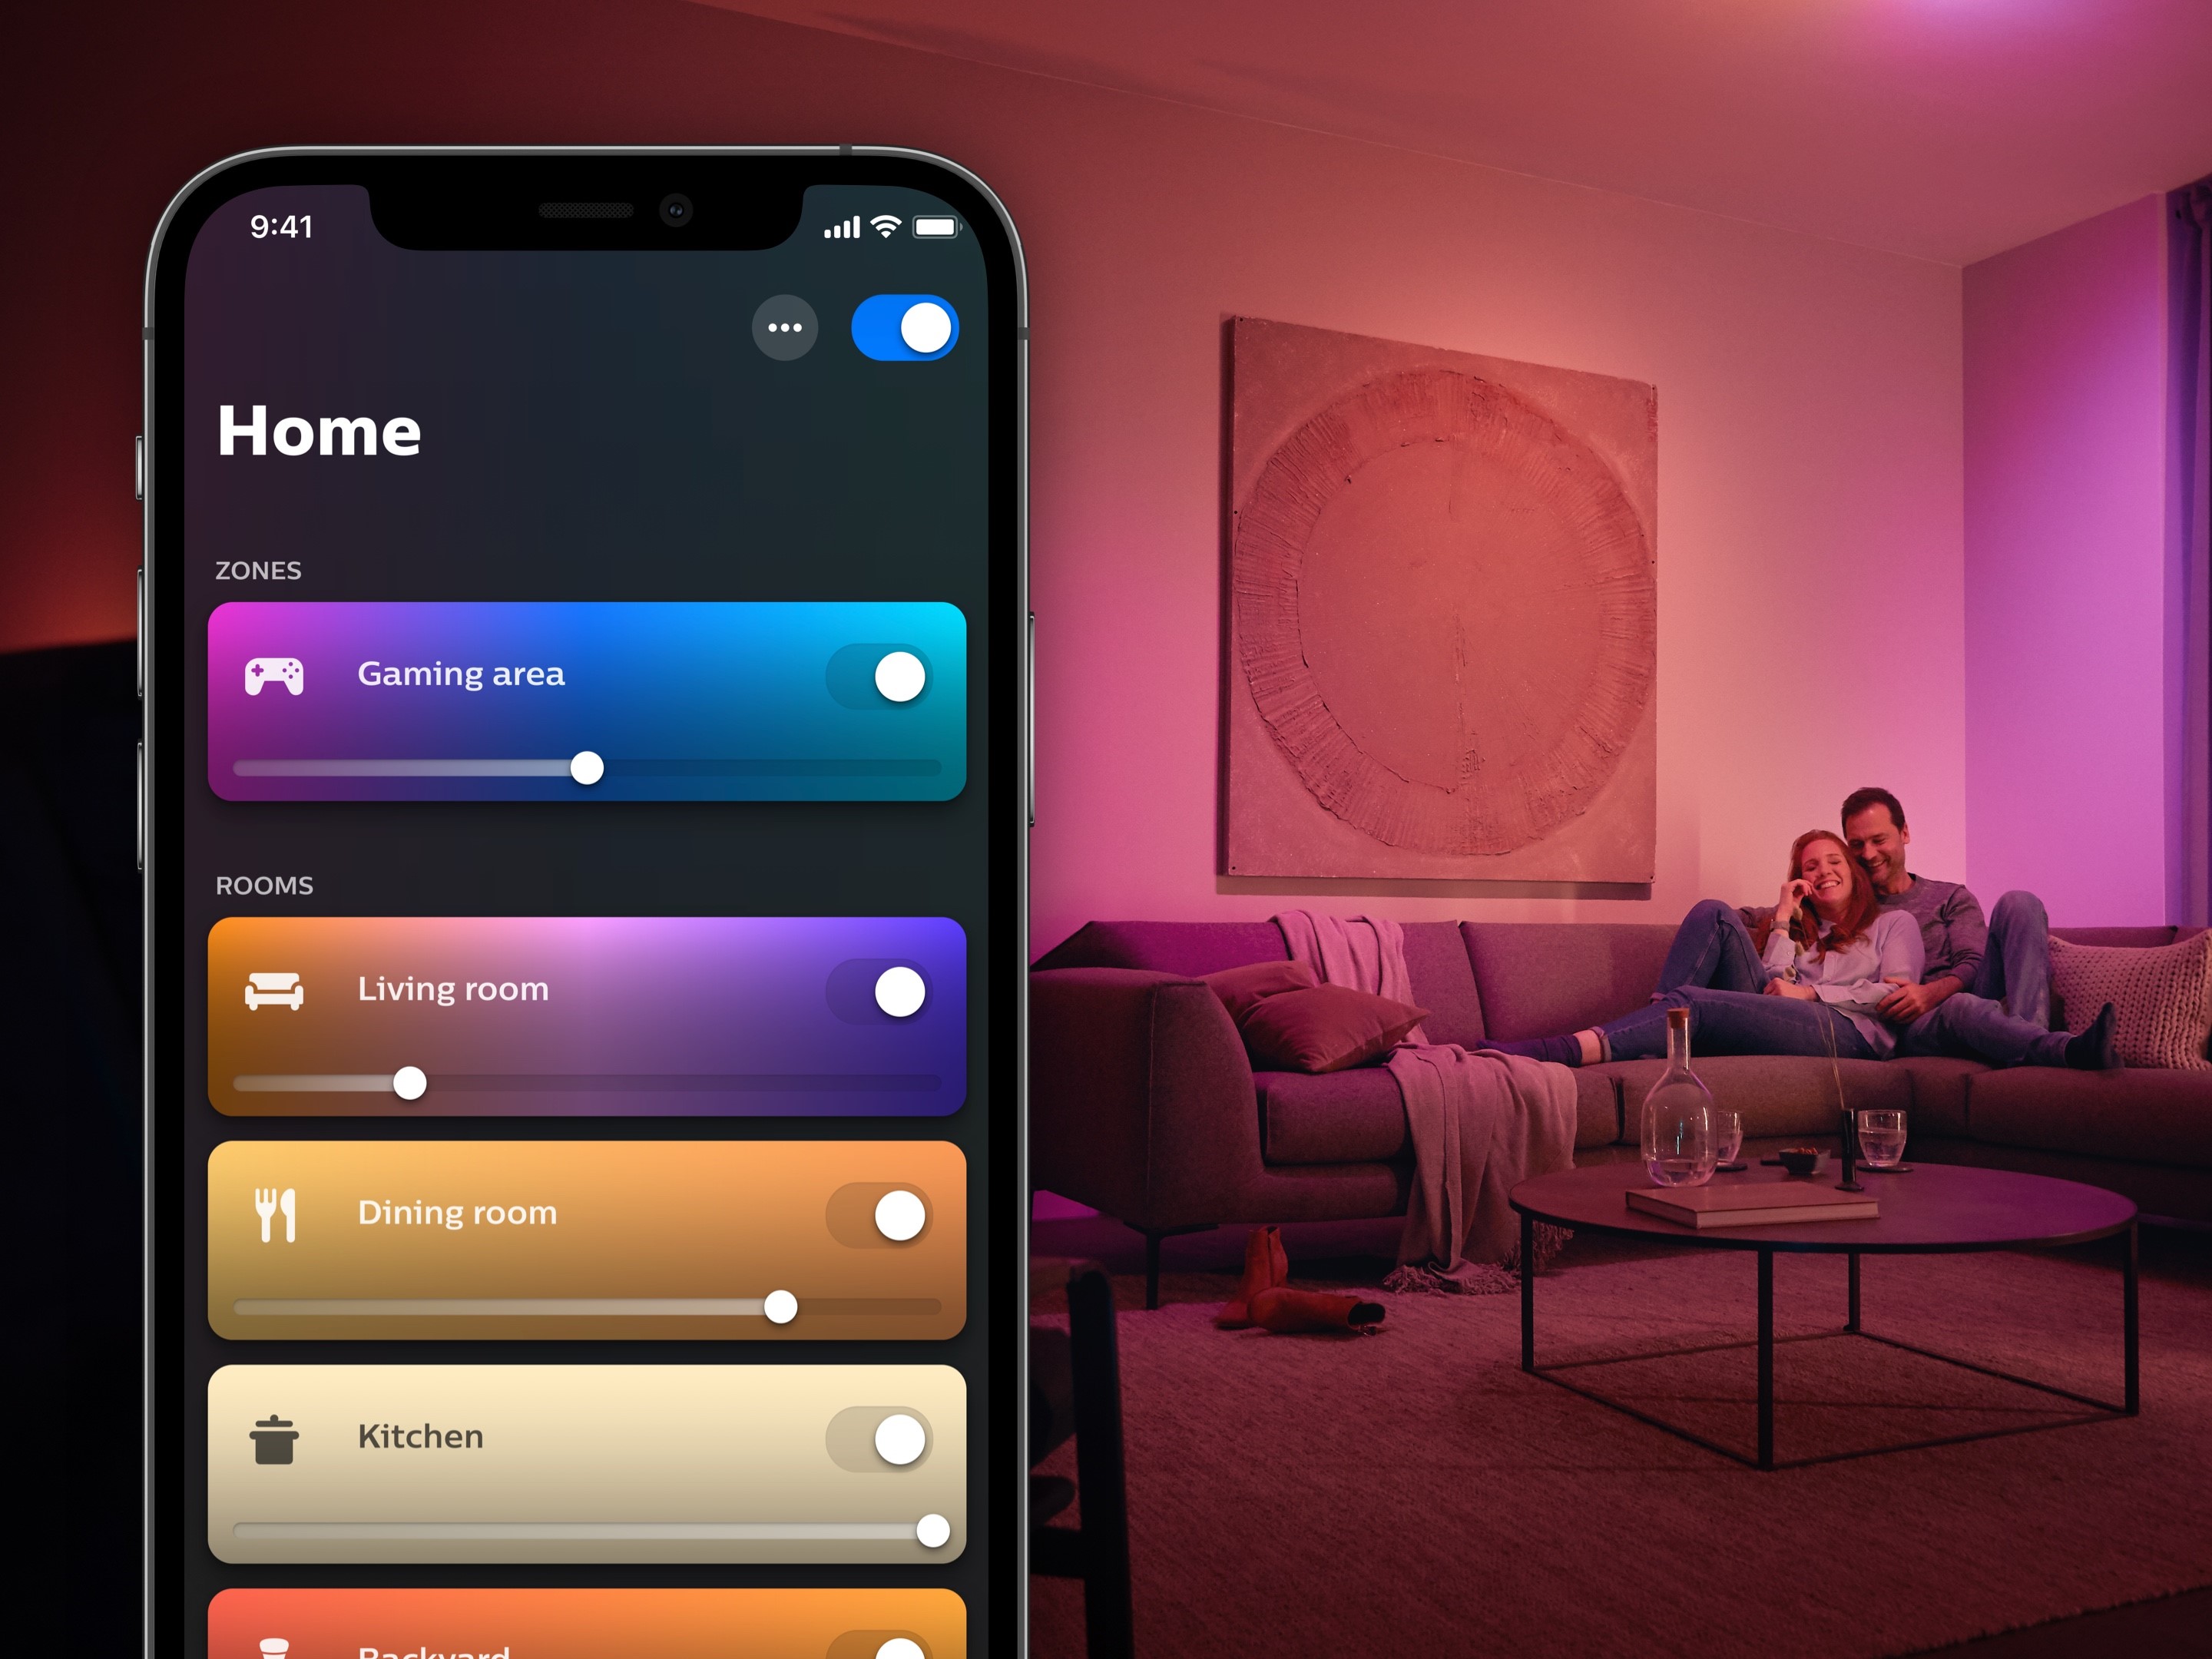 Philips Hue unveils new lights, plus news about its Matter update